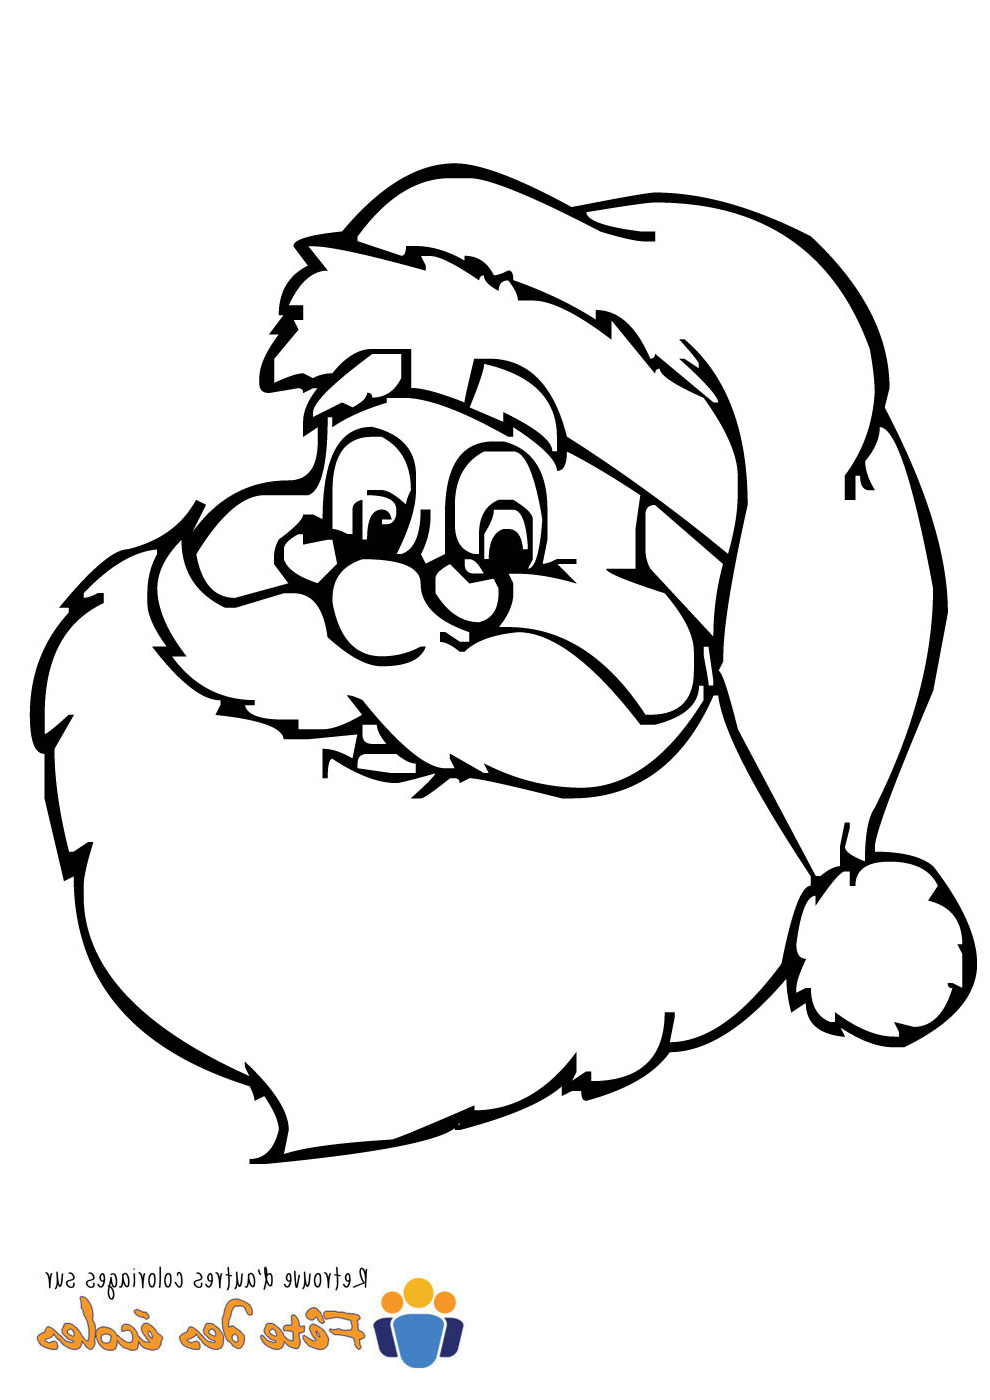 15 expert coloriage pere noel image